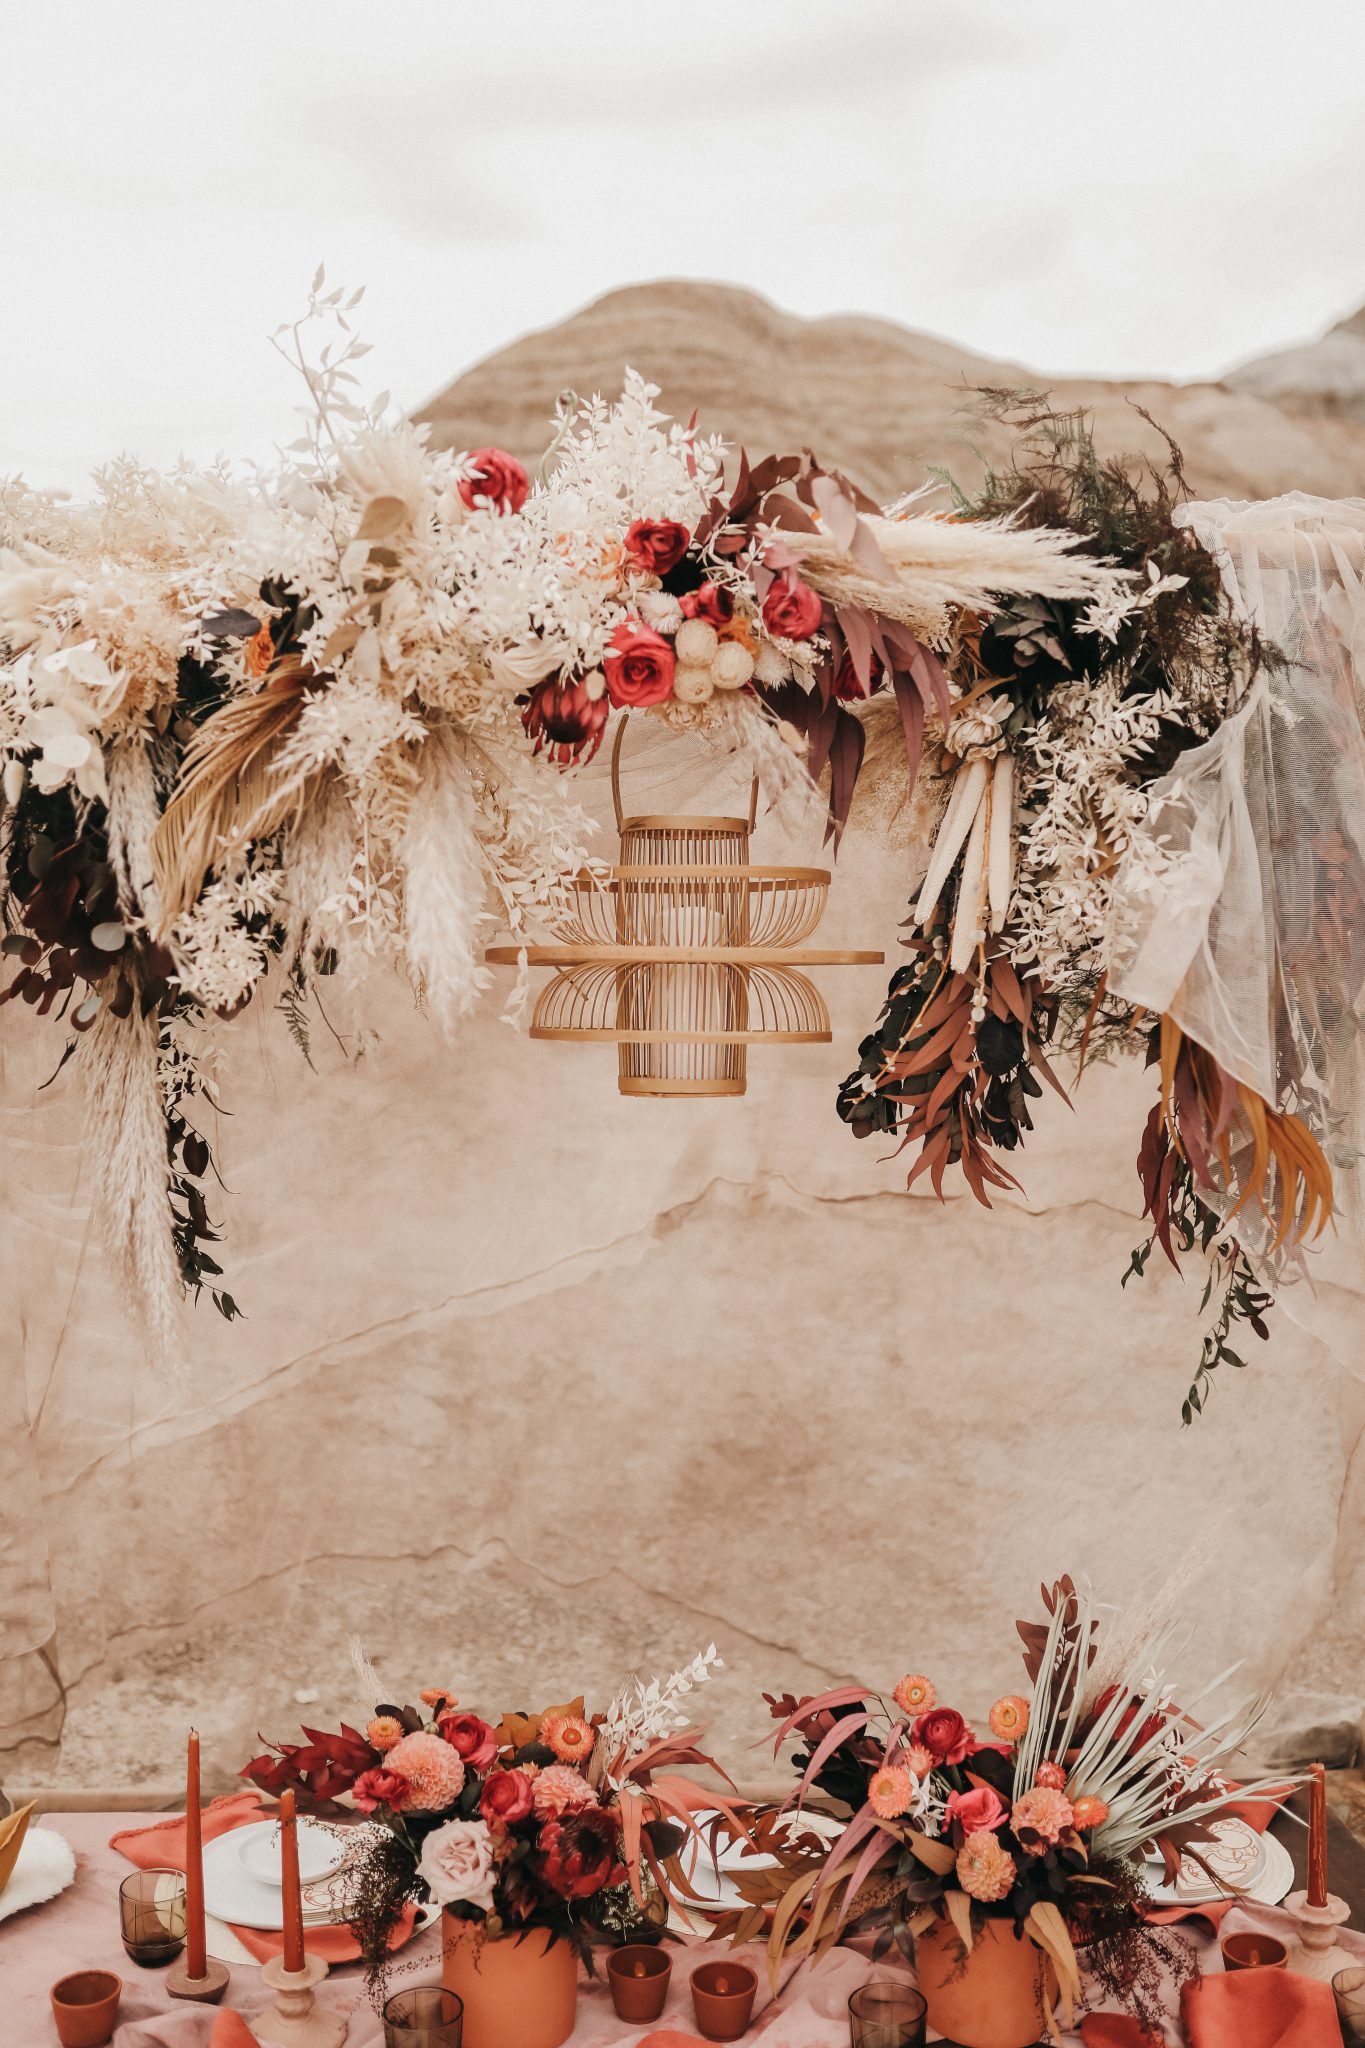 Decor for a Moroccan inspired elopement with boho florals, a wicker chandelier and linen tent